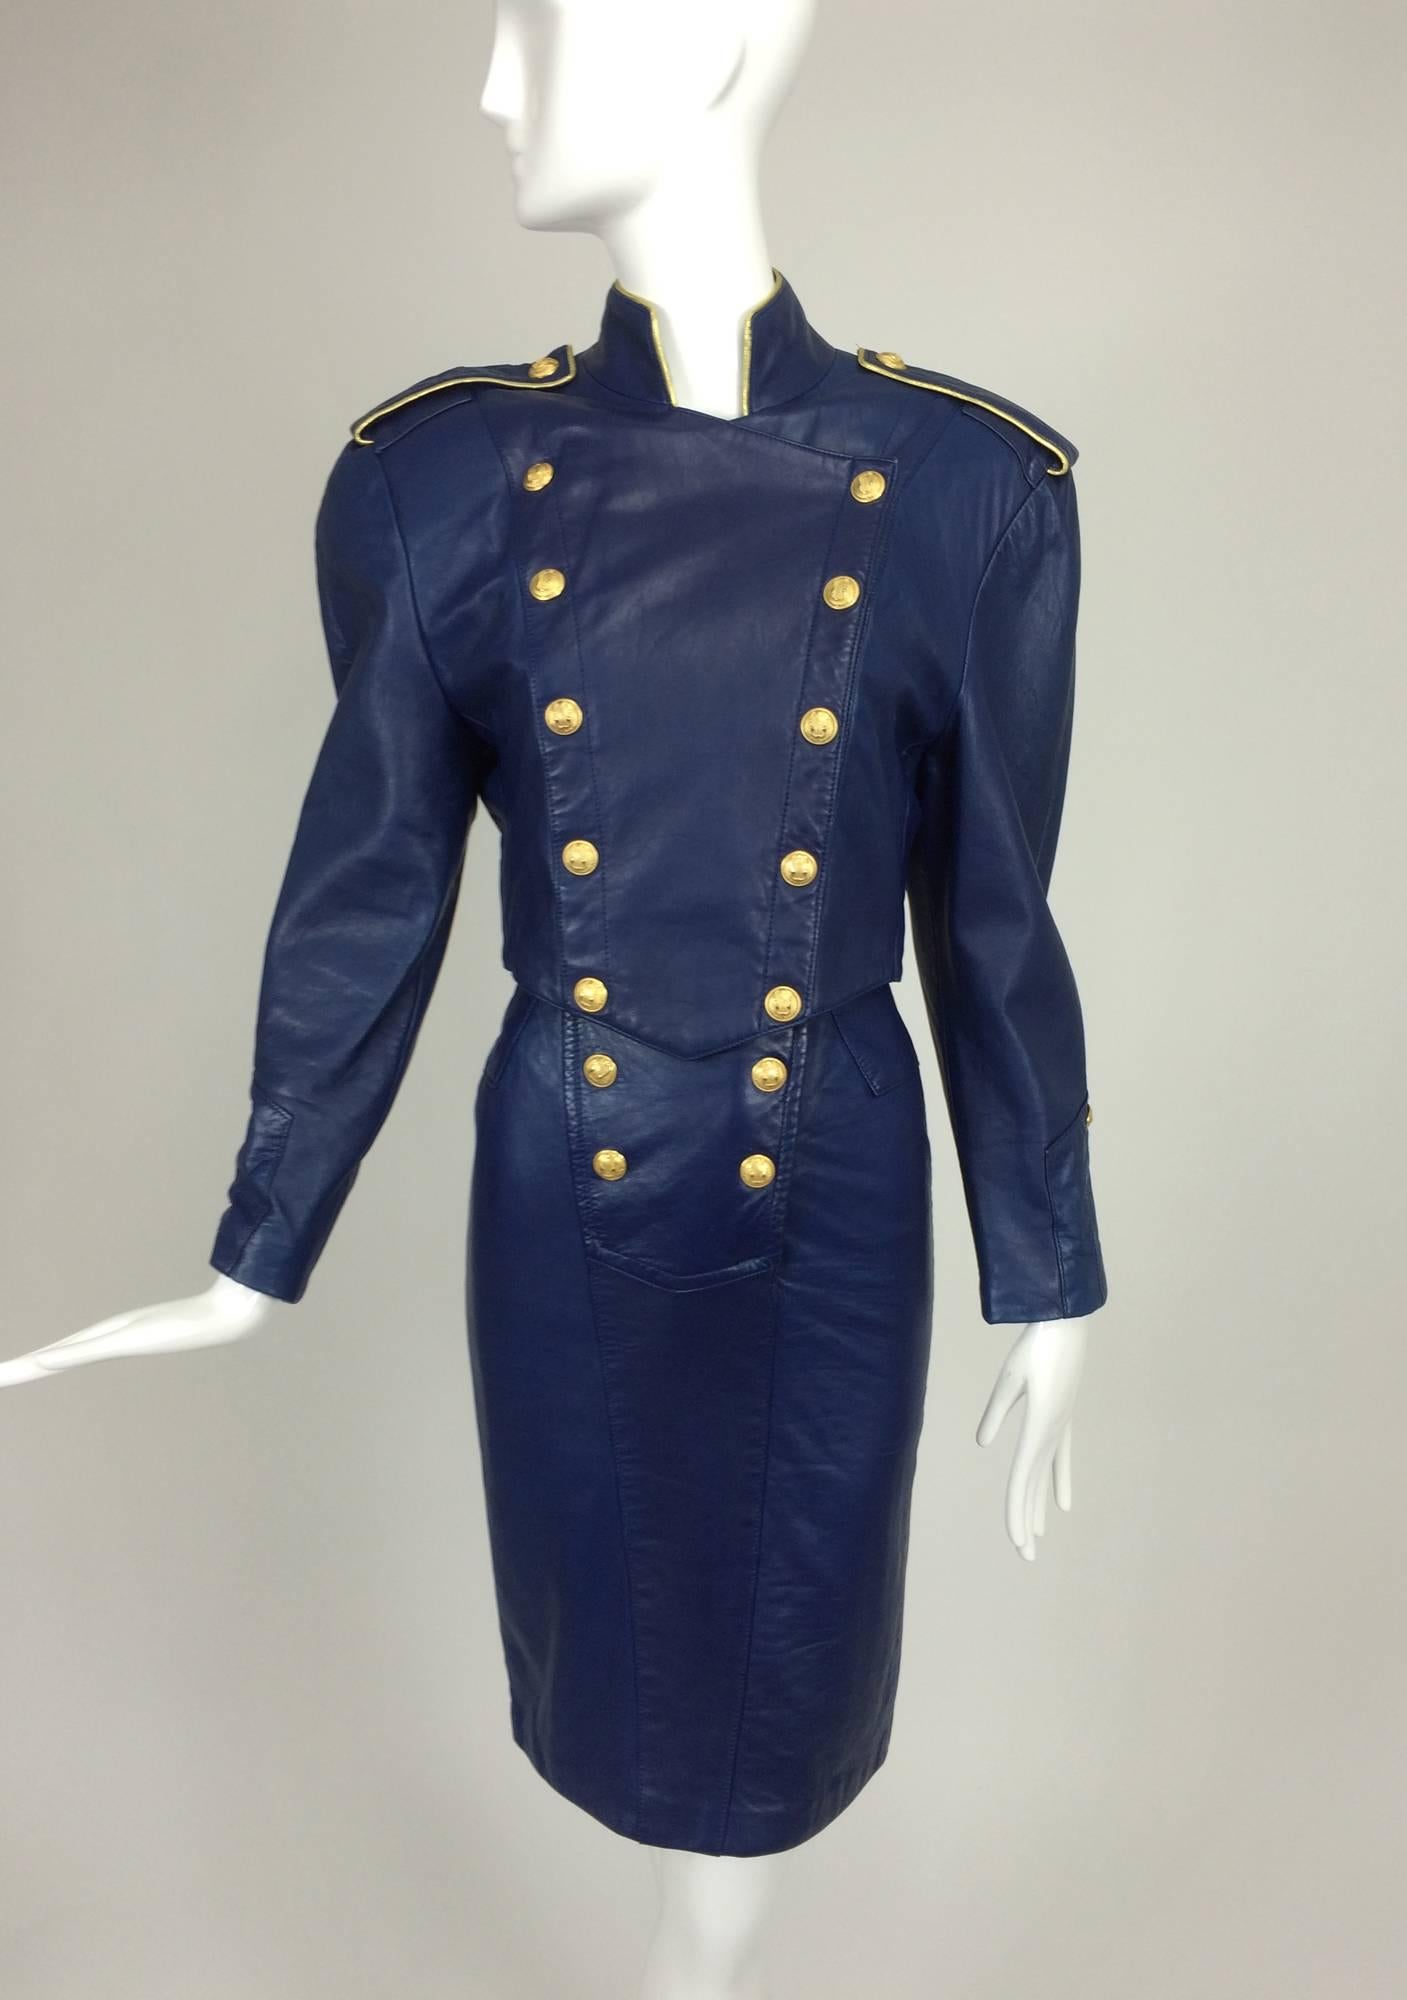 North Beach navy Leather double breasted dress & jacket 1980s...The fitted strapless dress closes at the front with a double row of gold snaps, the back features a short band at the waist with two gold buttons, there is a 7 1/2